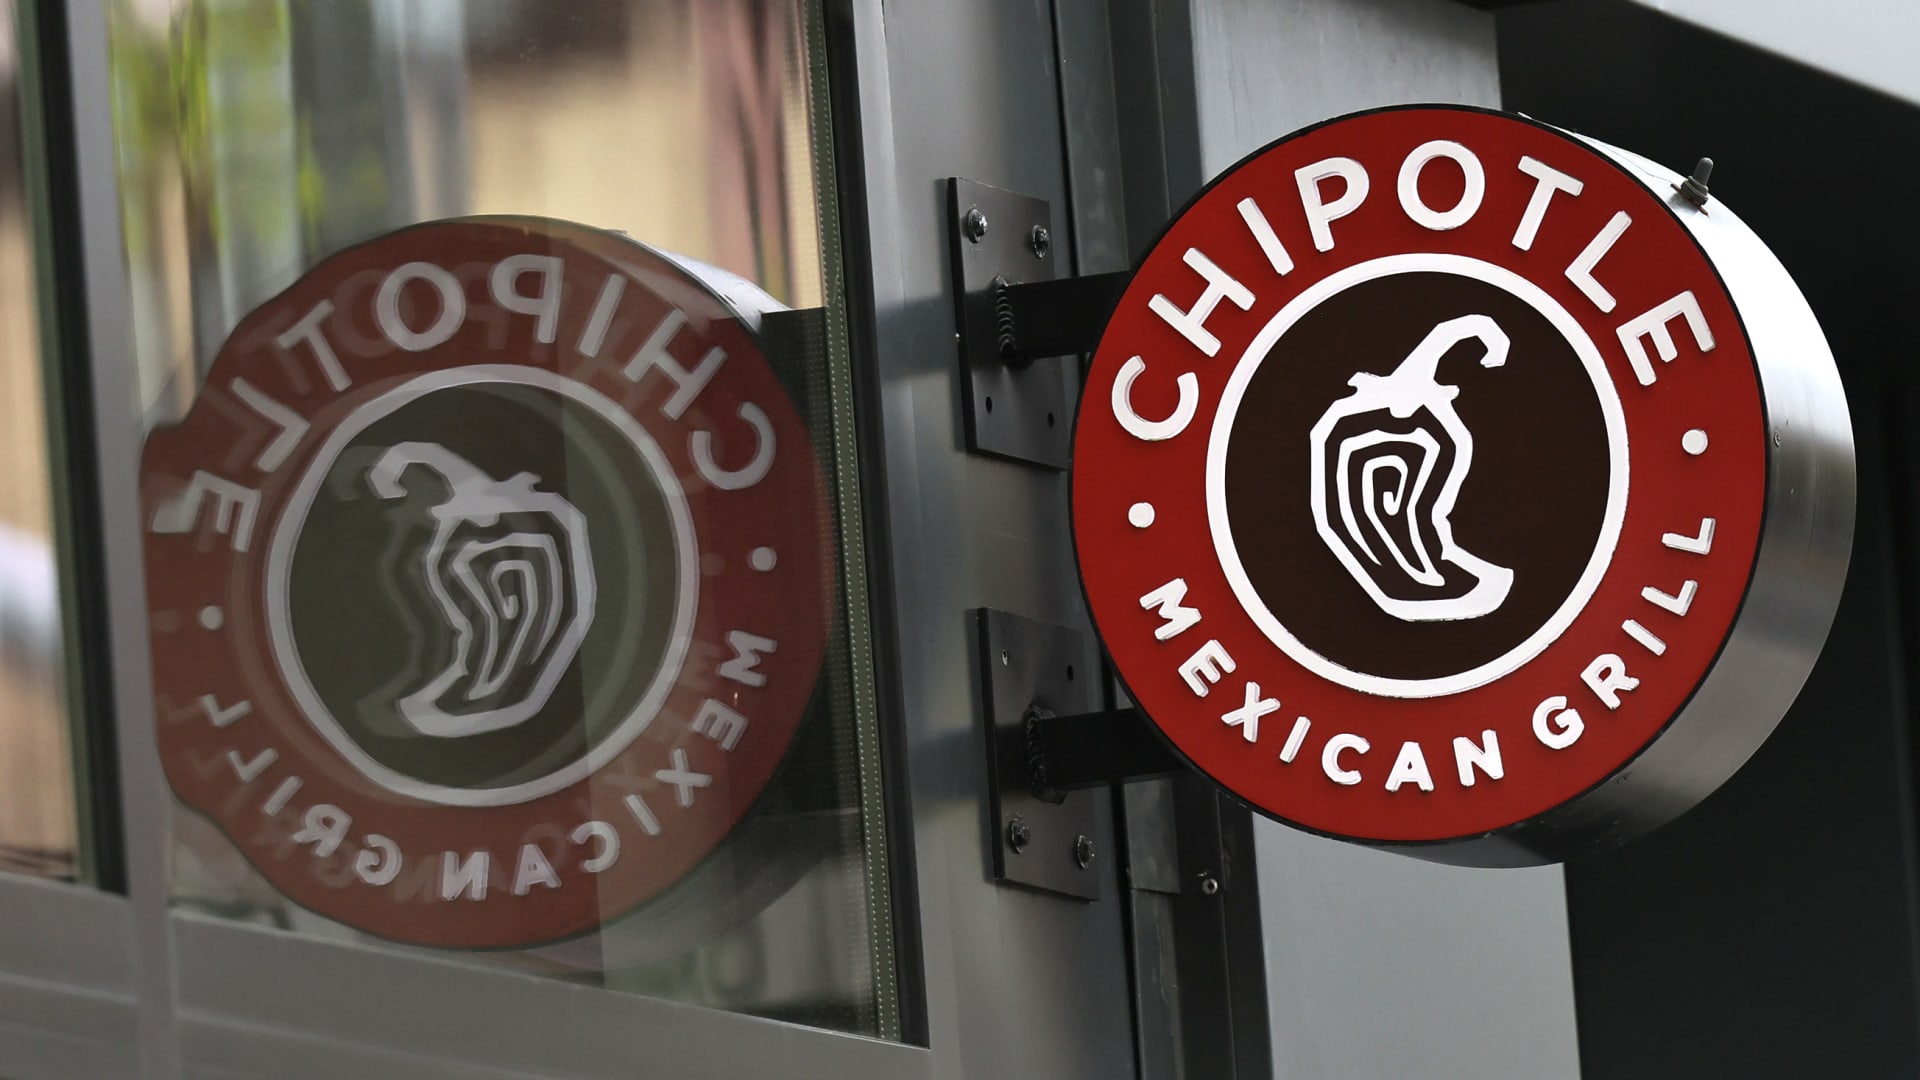 Chipotle restaurant in Michigan votes to unionize, in a first for the chain